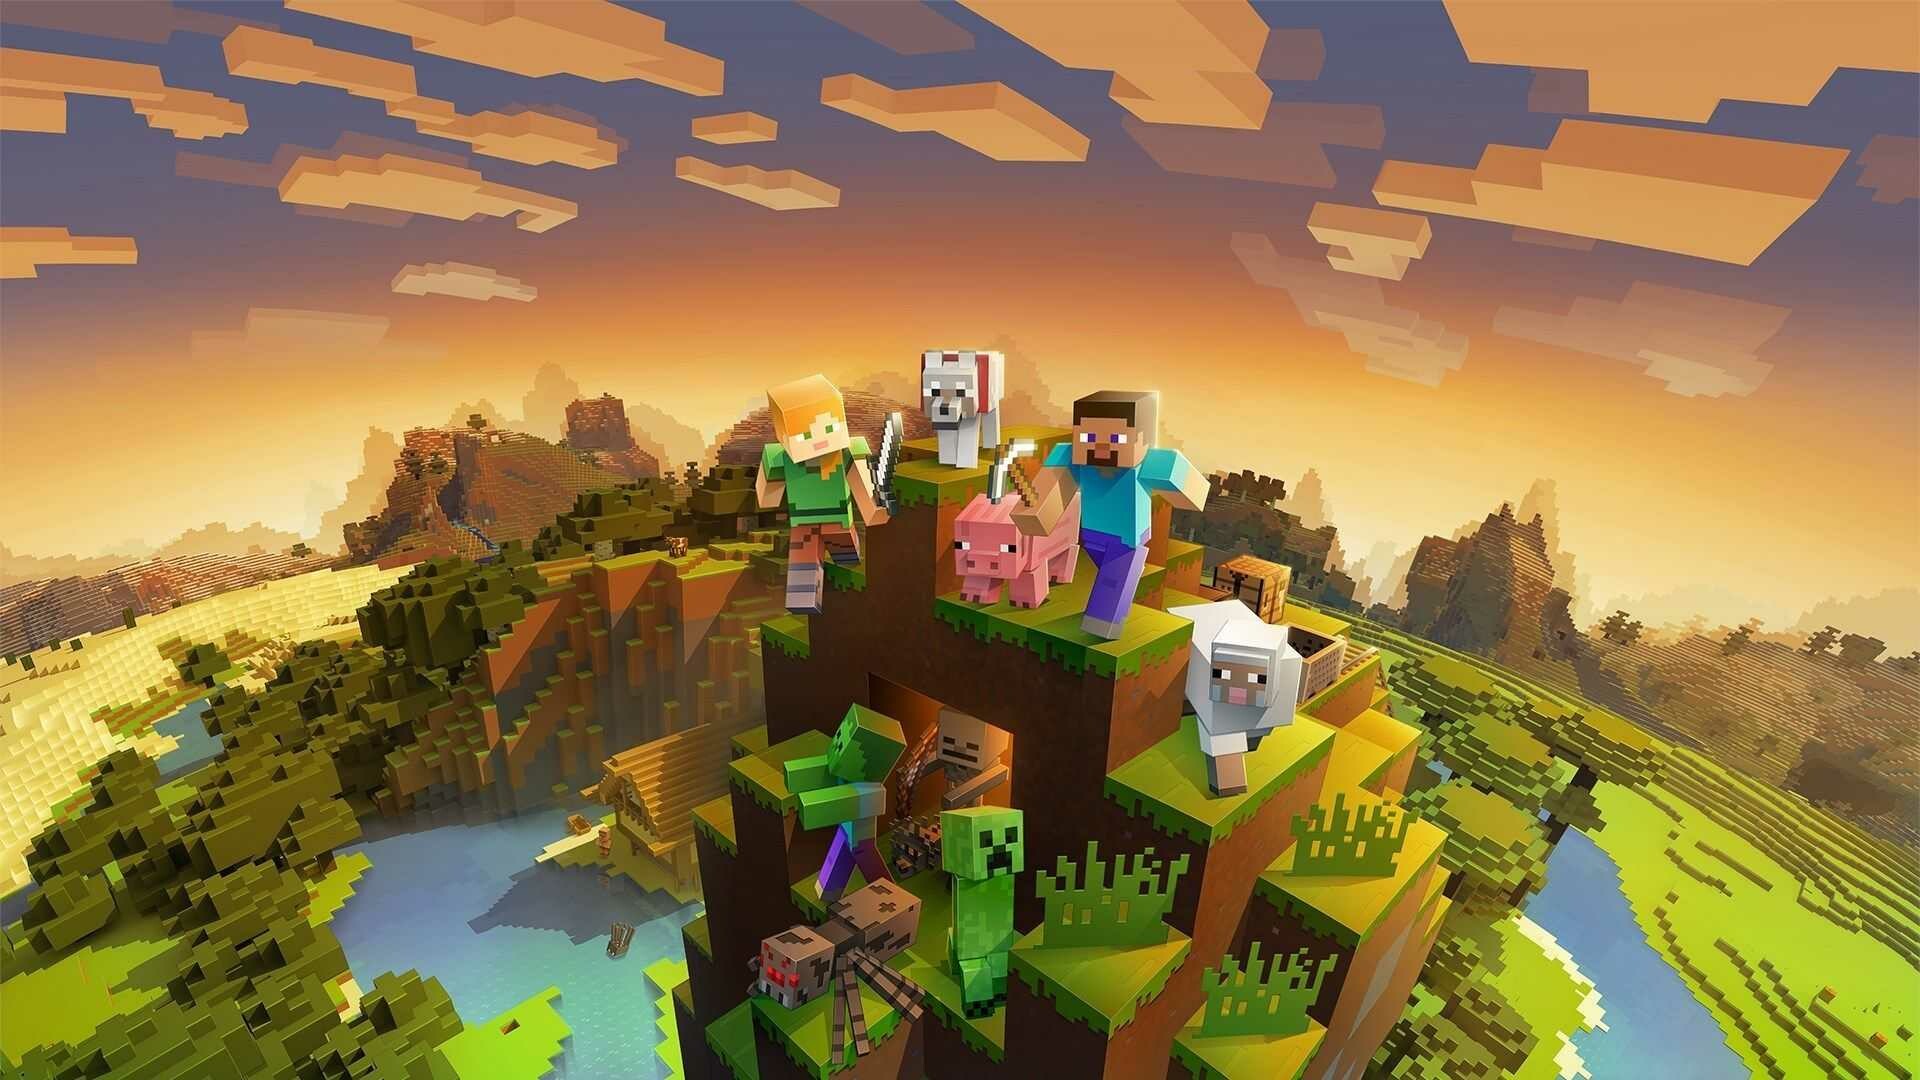 Minecraft: Players encounter various non-player characters known as mobs, such as animals, villagers, and hostile creatures. 1920x1080 Full HD Wallpaper.